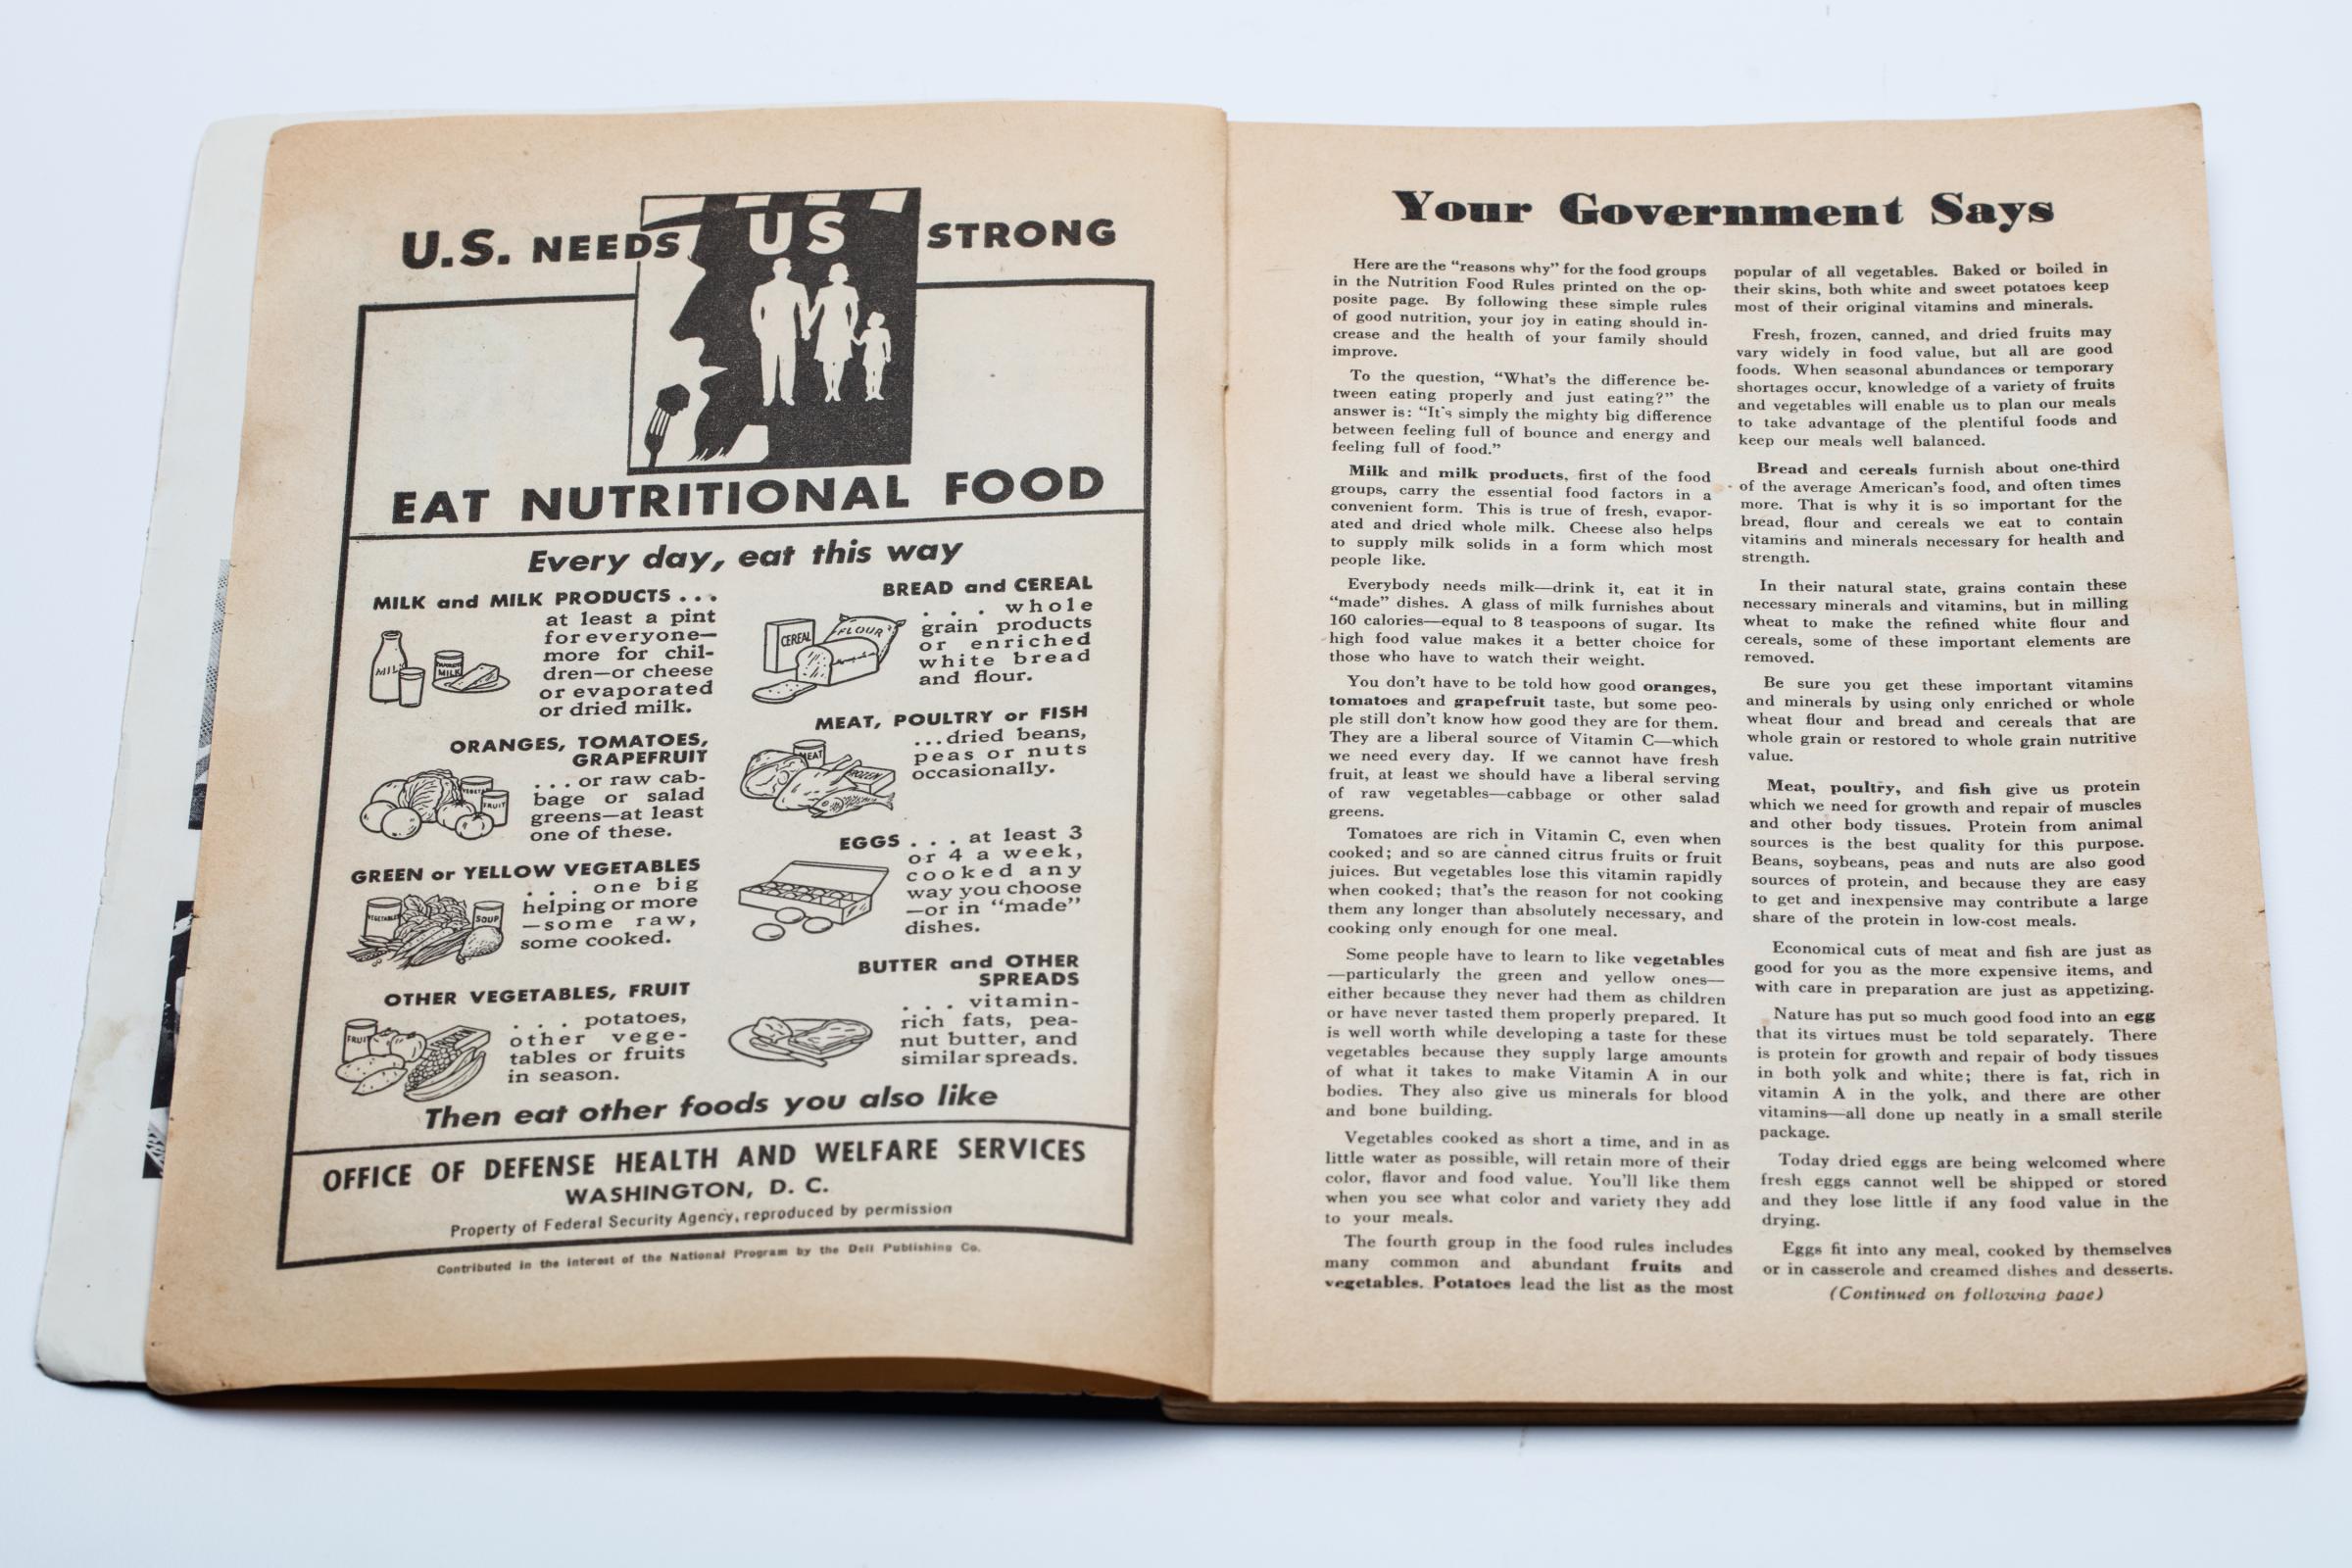 WWII-era cookbook for the home front